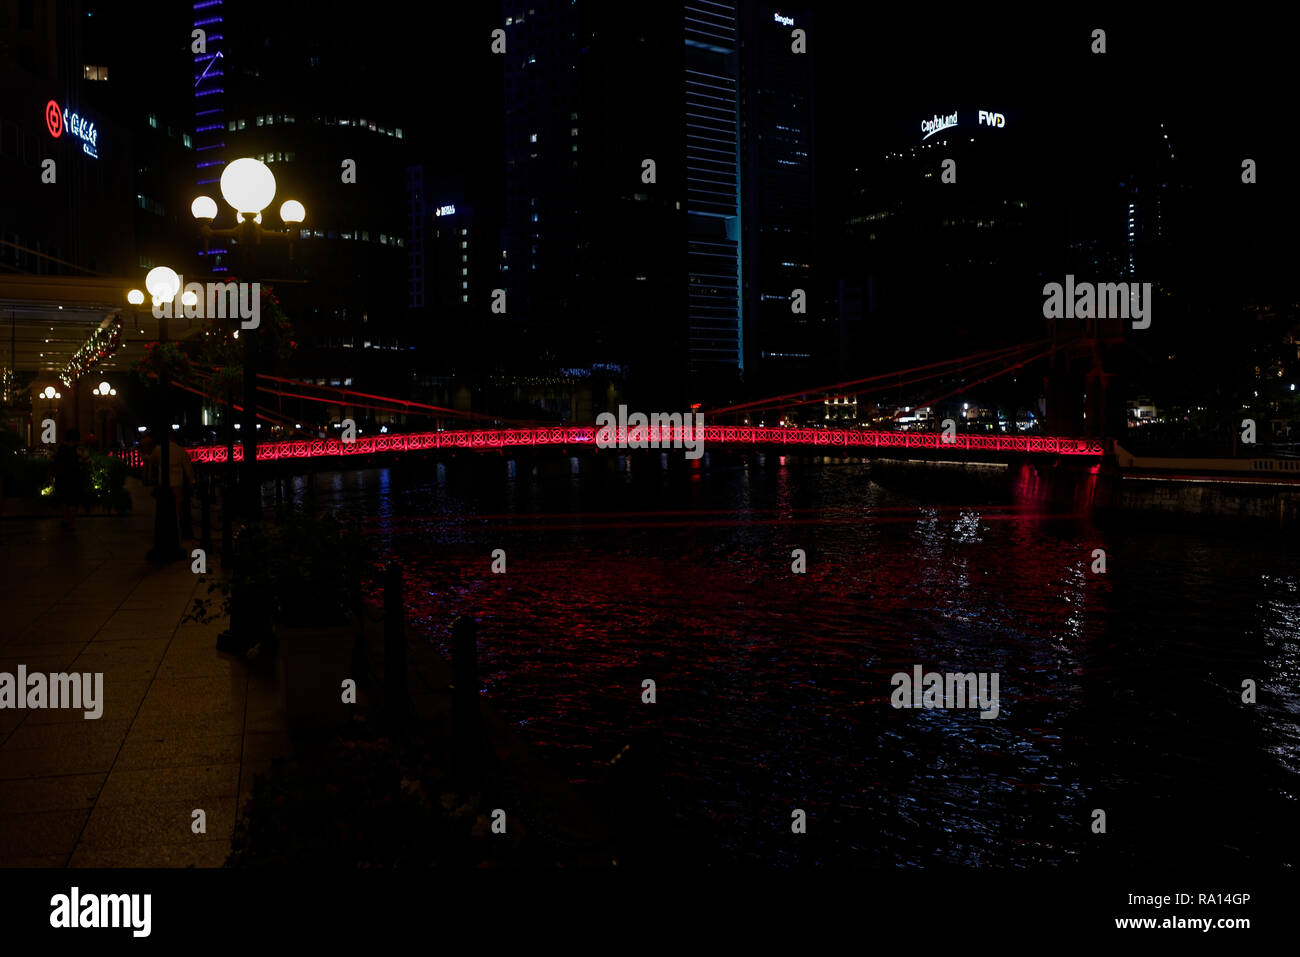 The Cavenaugh bridge, the only suspension bridge on the Singapore river, illuminated in red at night. Stock Photo